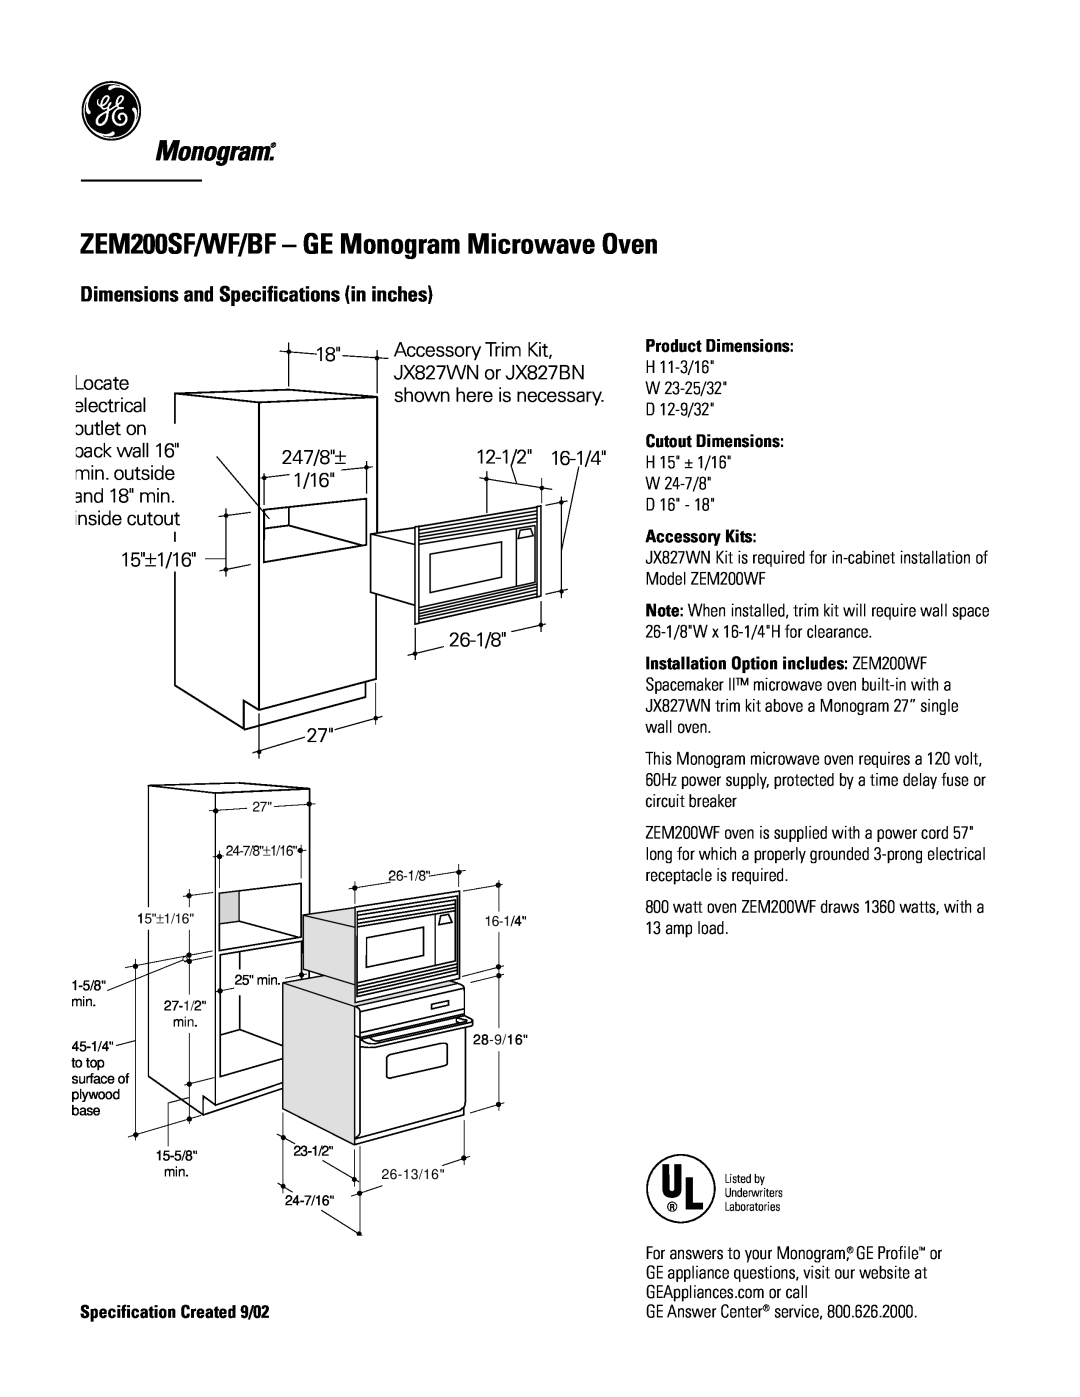 GE Monogram ZEM200WF dimensions ZEM200SF/WF/BF - GE Monogram Microwave Oven, Dimensions and Specifications in inches 